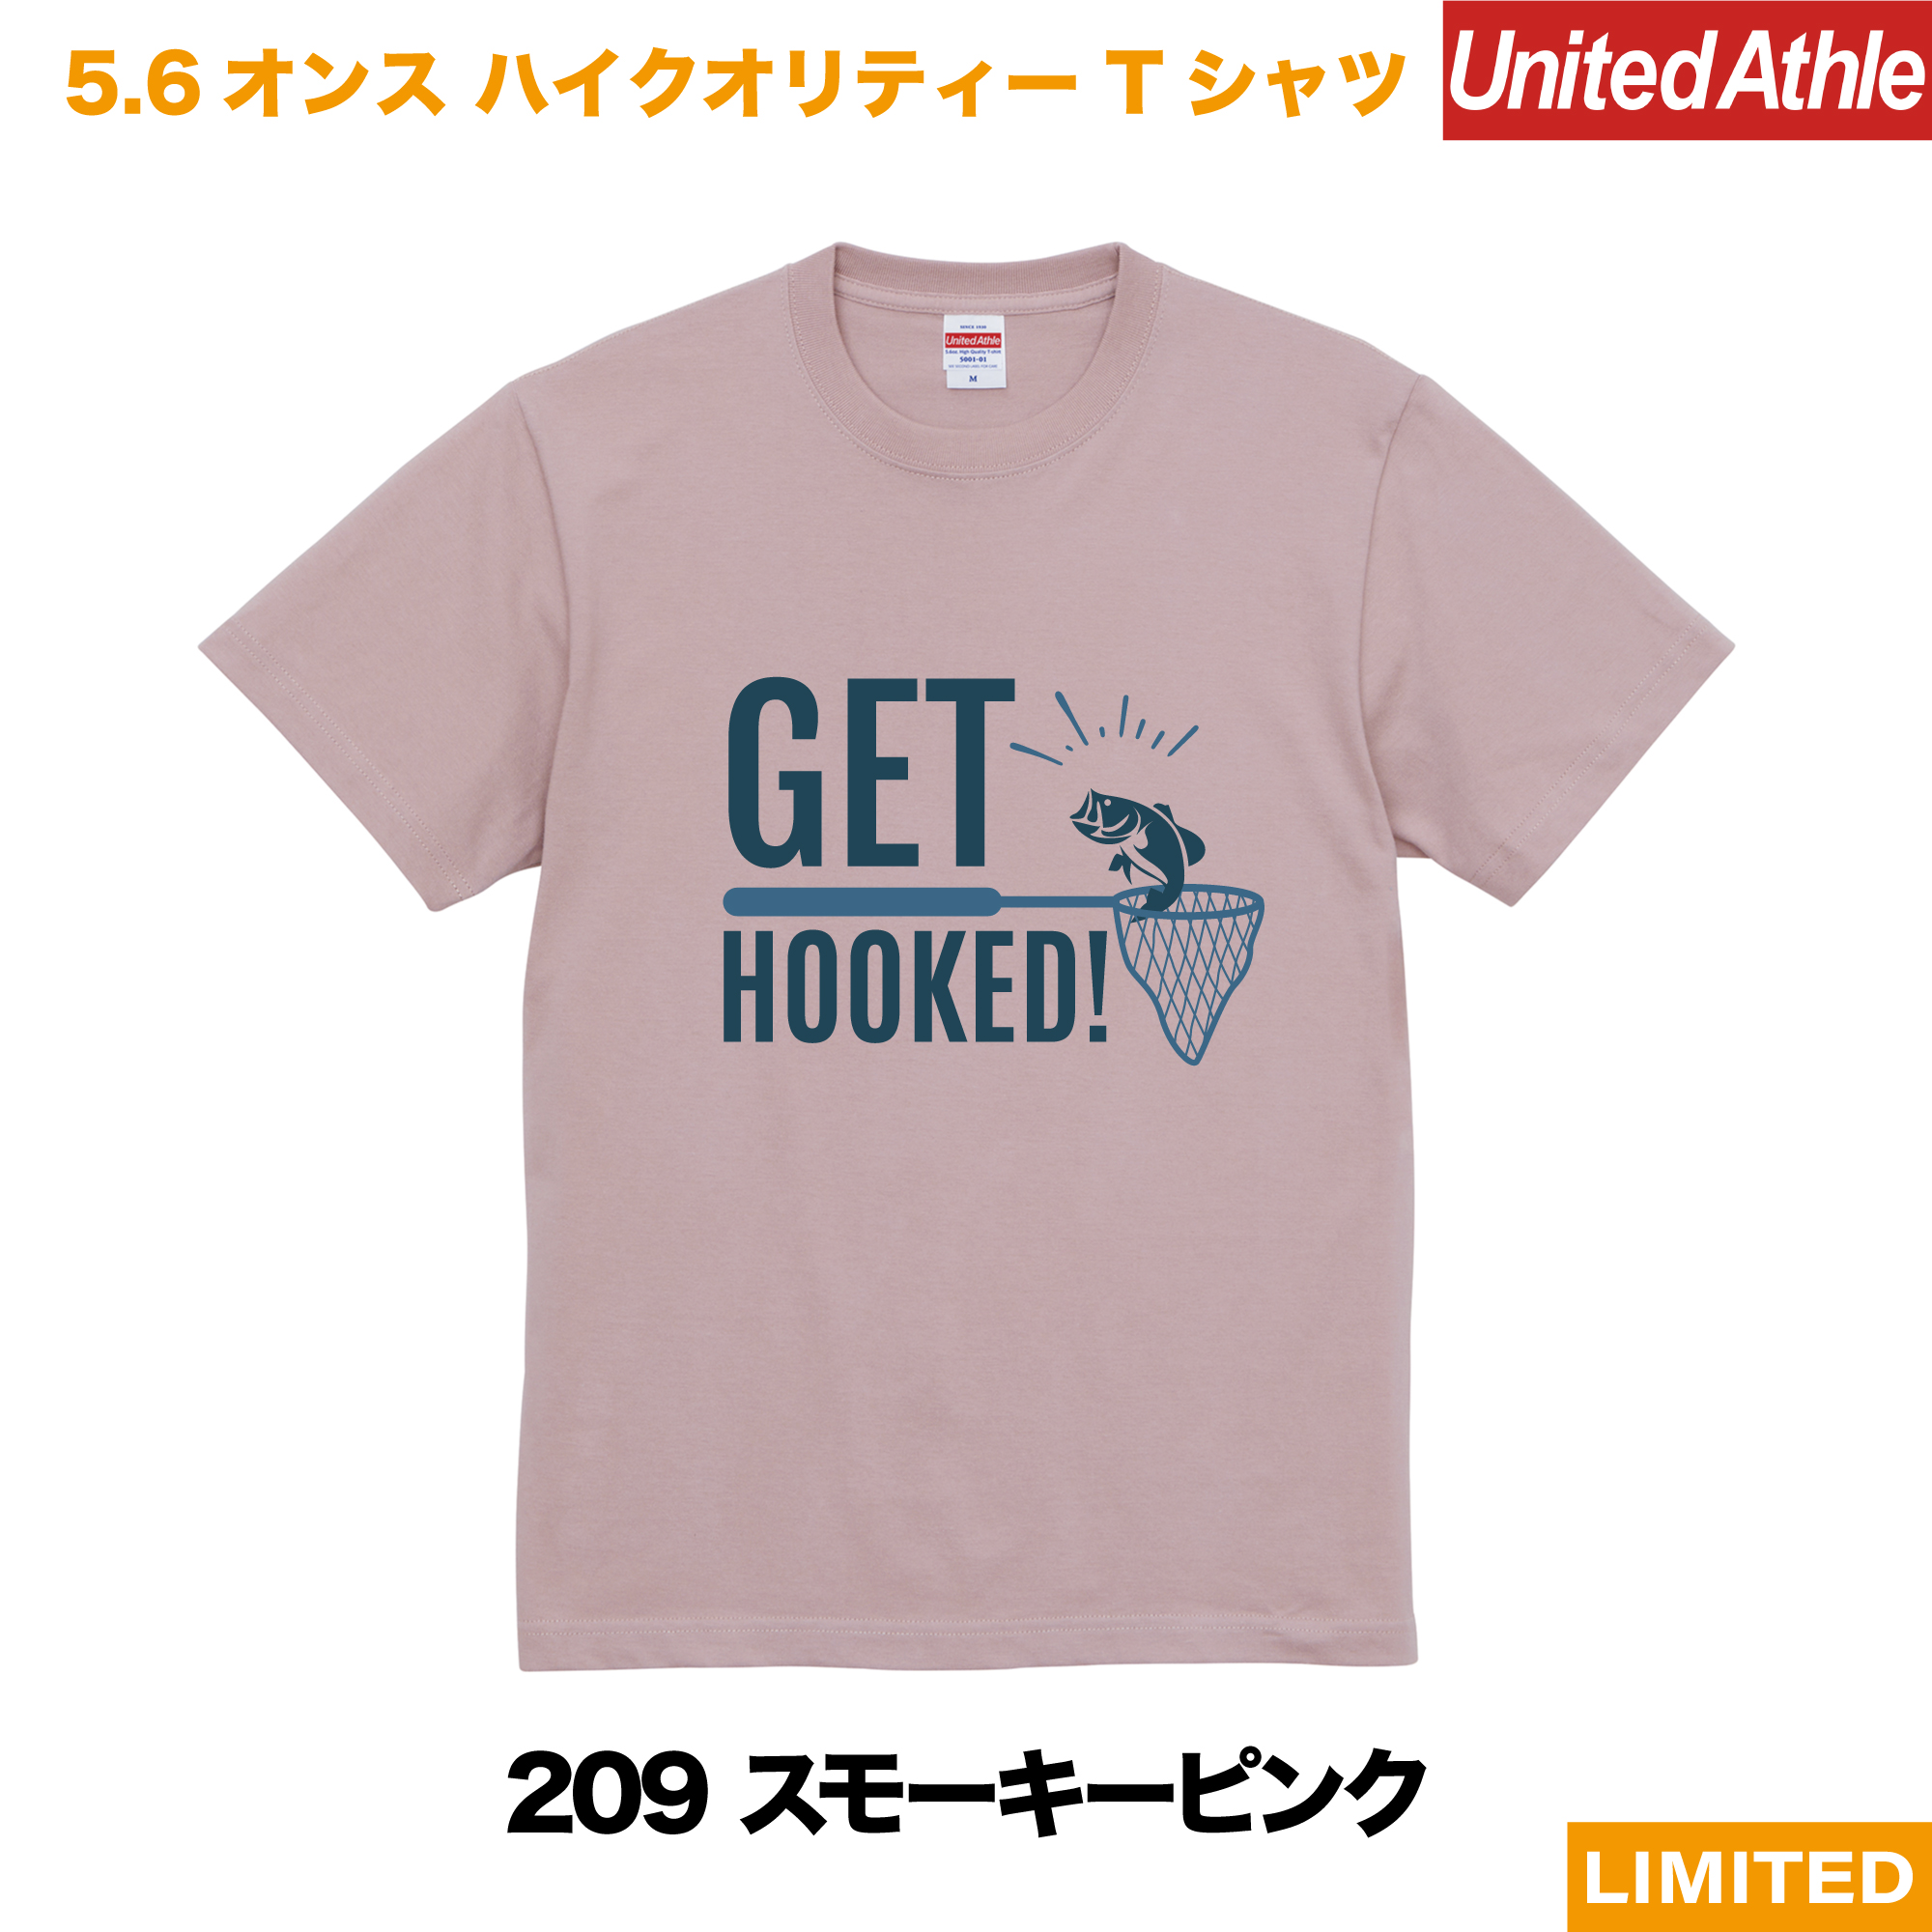 GET HOOKED　プリントTシャツ　5001-01【スモーキーピンク】＜アダルト＞